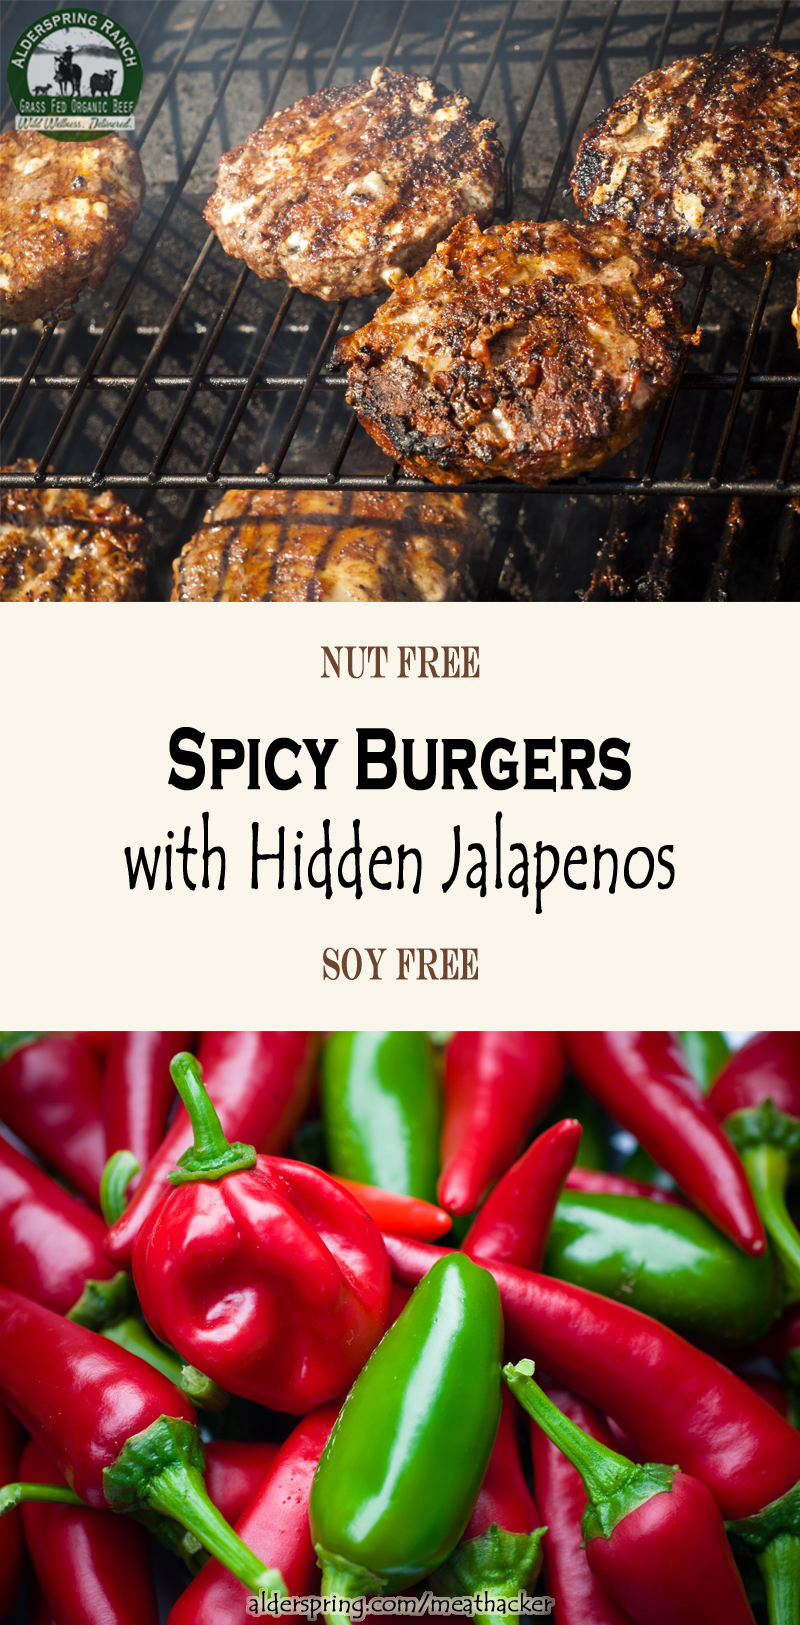 Spicy Burgers with Hidden Jalapenos